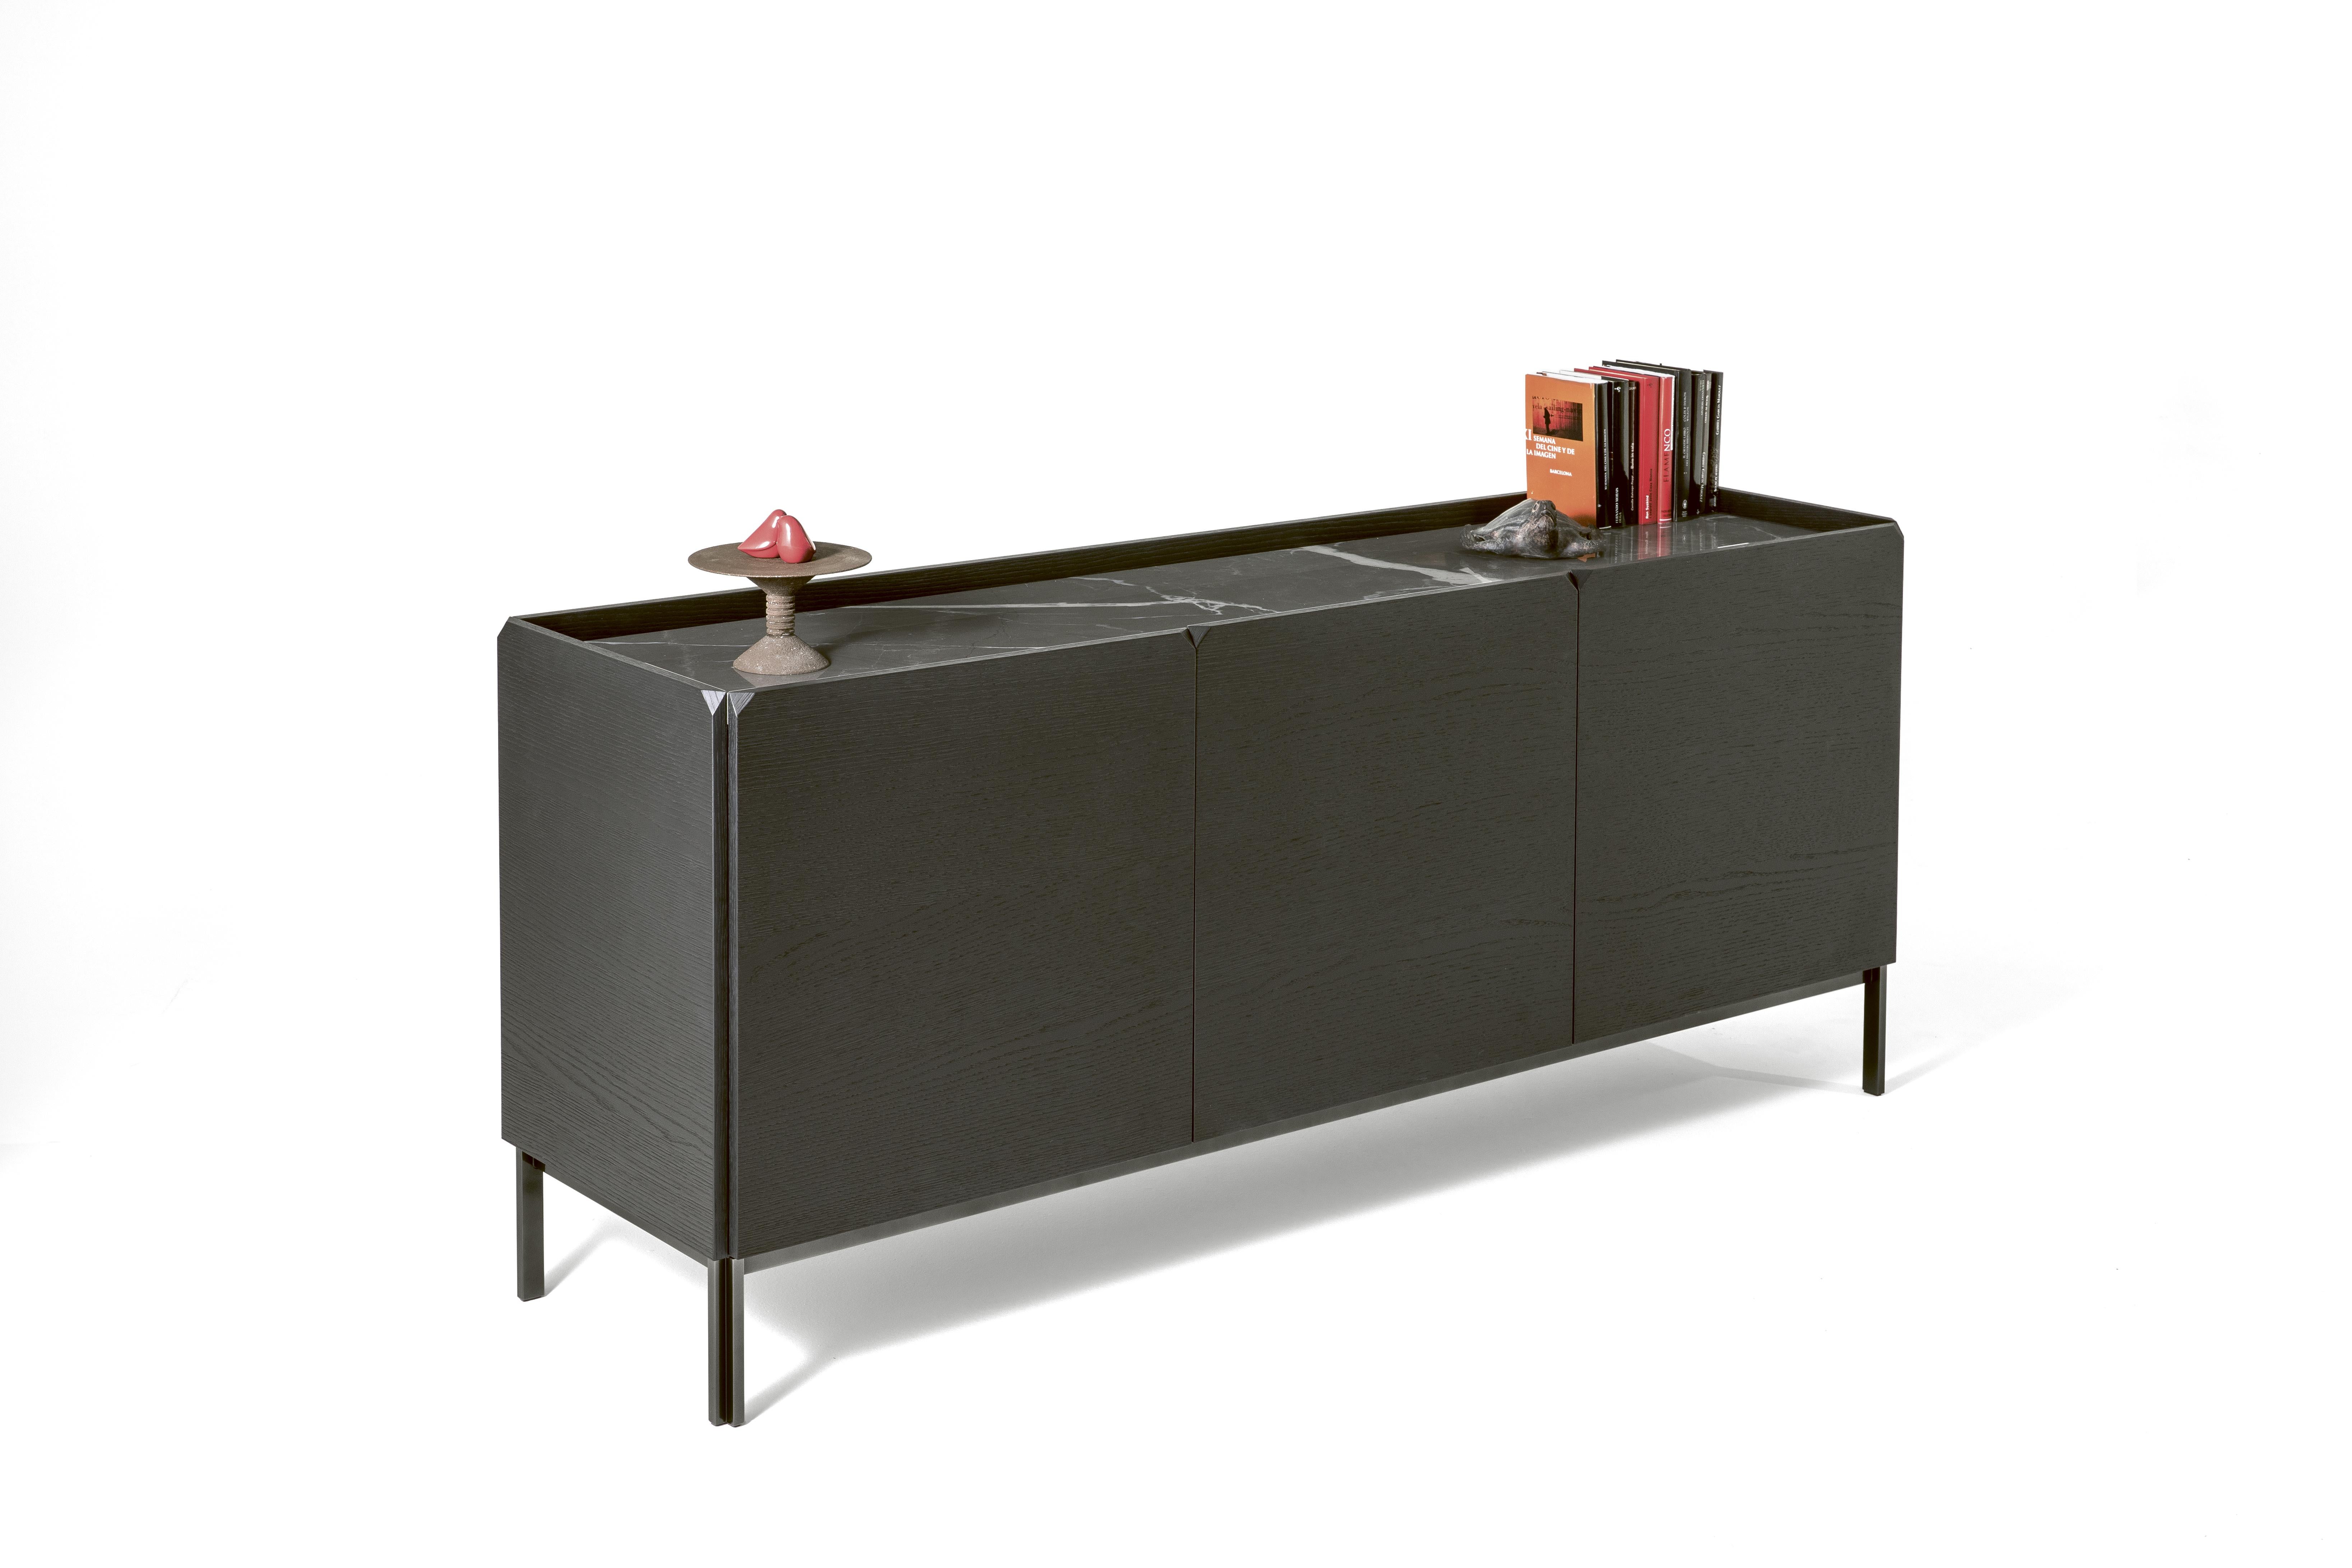 Wooden sideboard with three hinged doors, internal glass shelves, side panels and doors in Charcoal Oak veneer wood. The top is in Glossy Grey White-veined Super Marble, a material created combining Glass and Porcelain Stoneware (mixture of clays